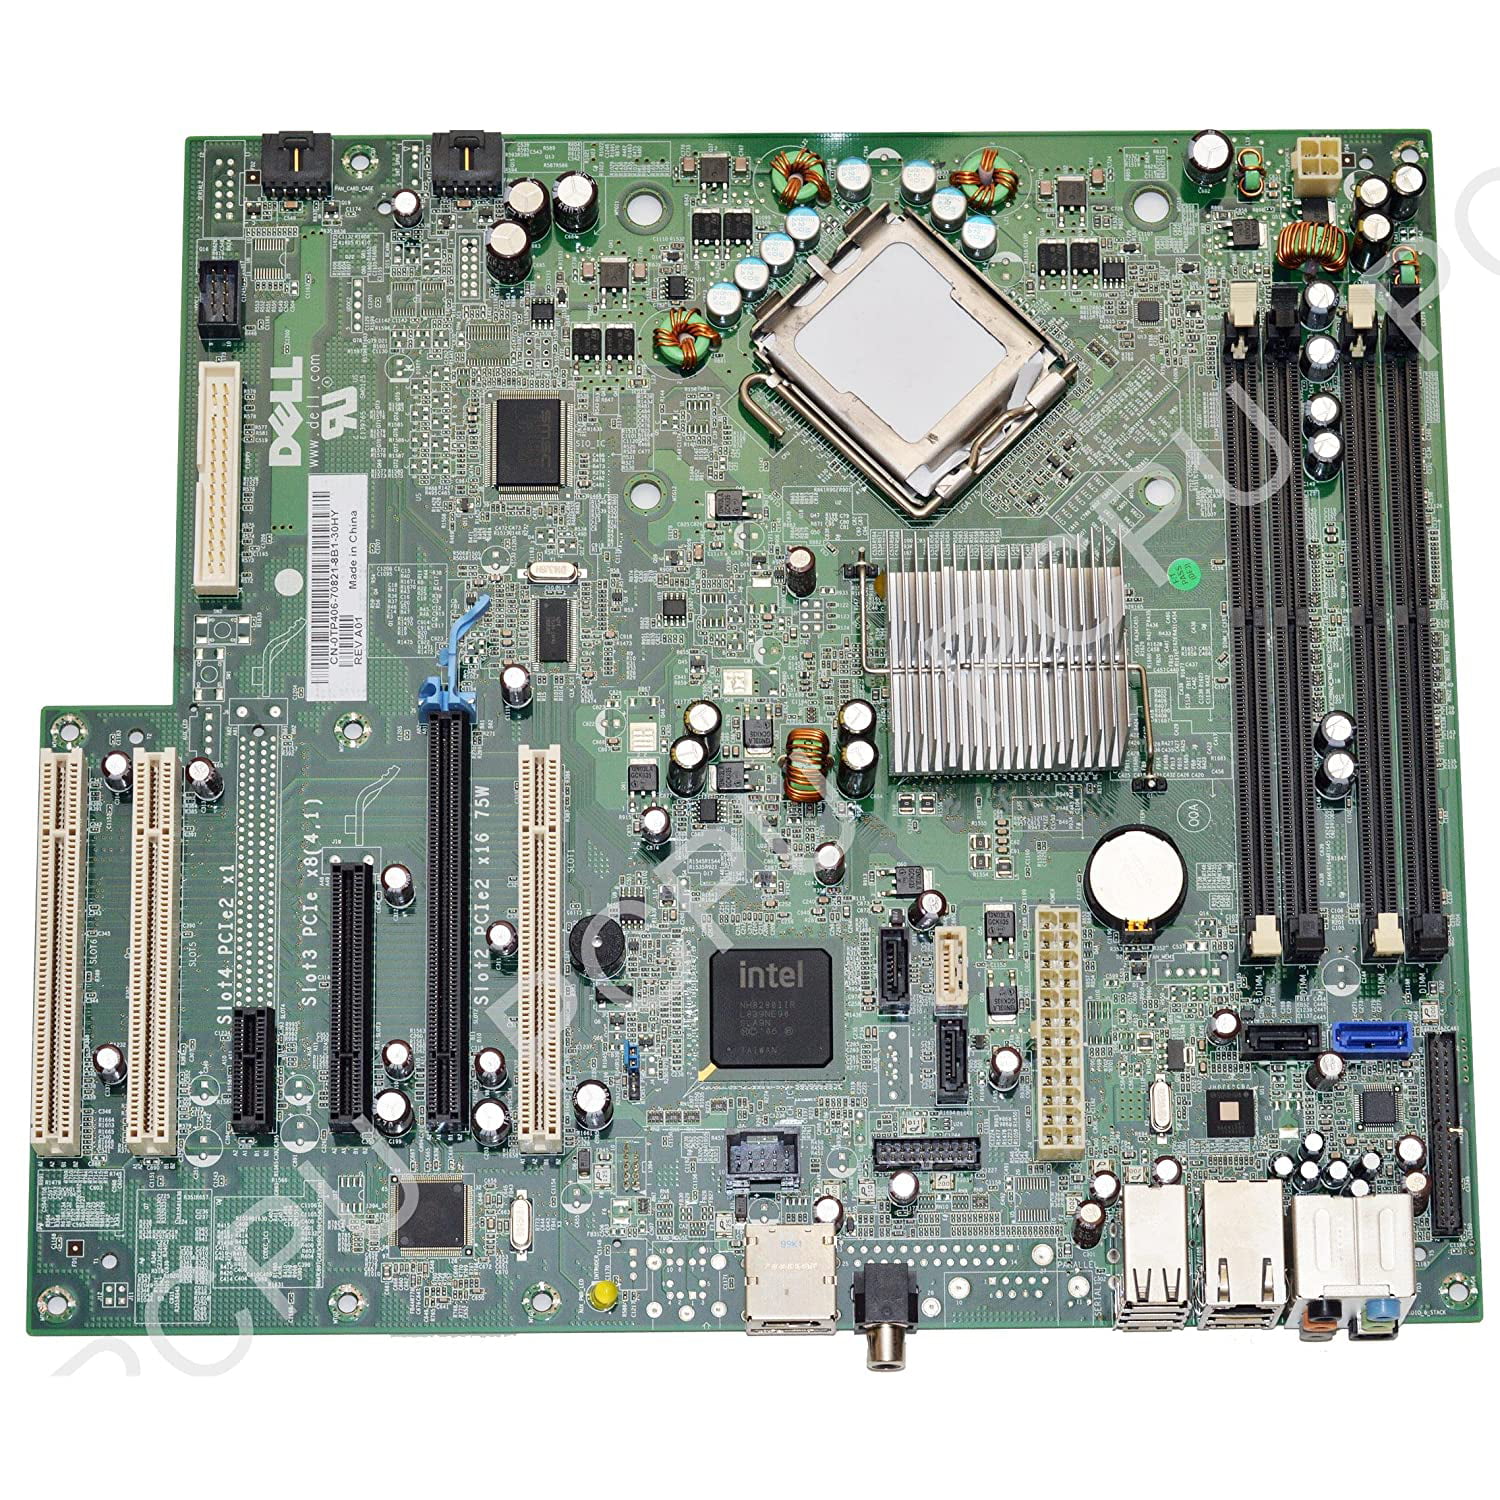 Genuine Dell TP406 Motherboard For XPS 420, Supports The Following